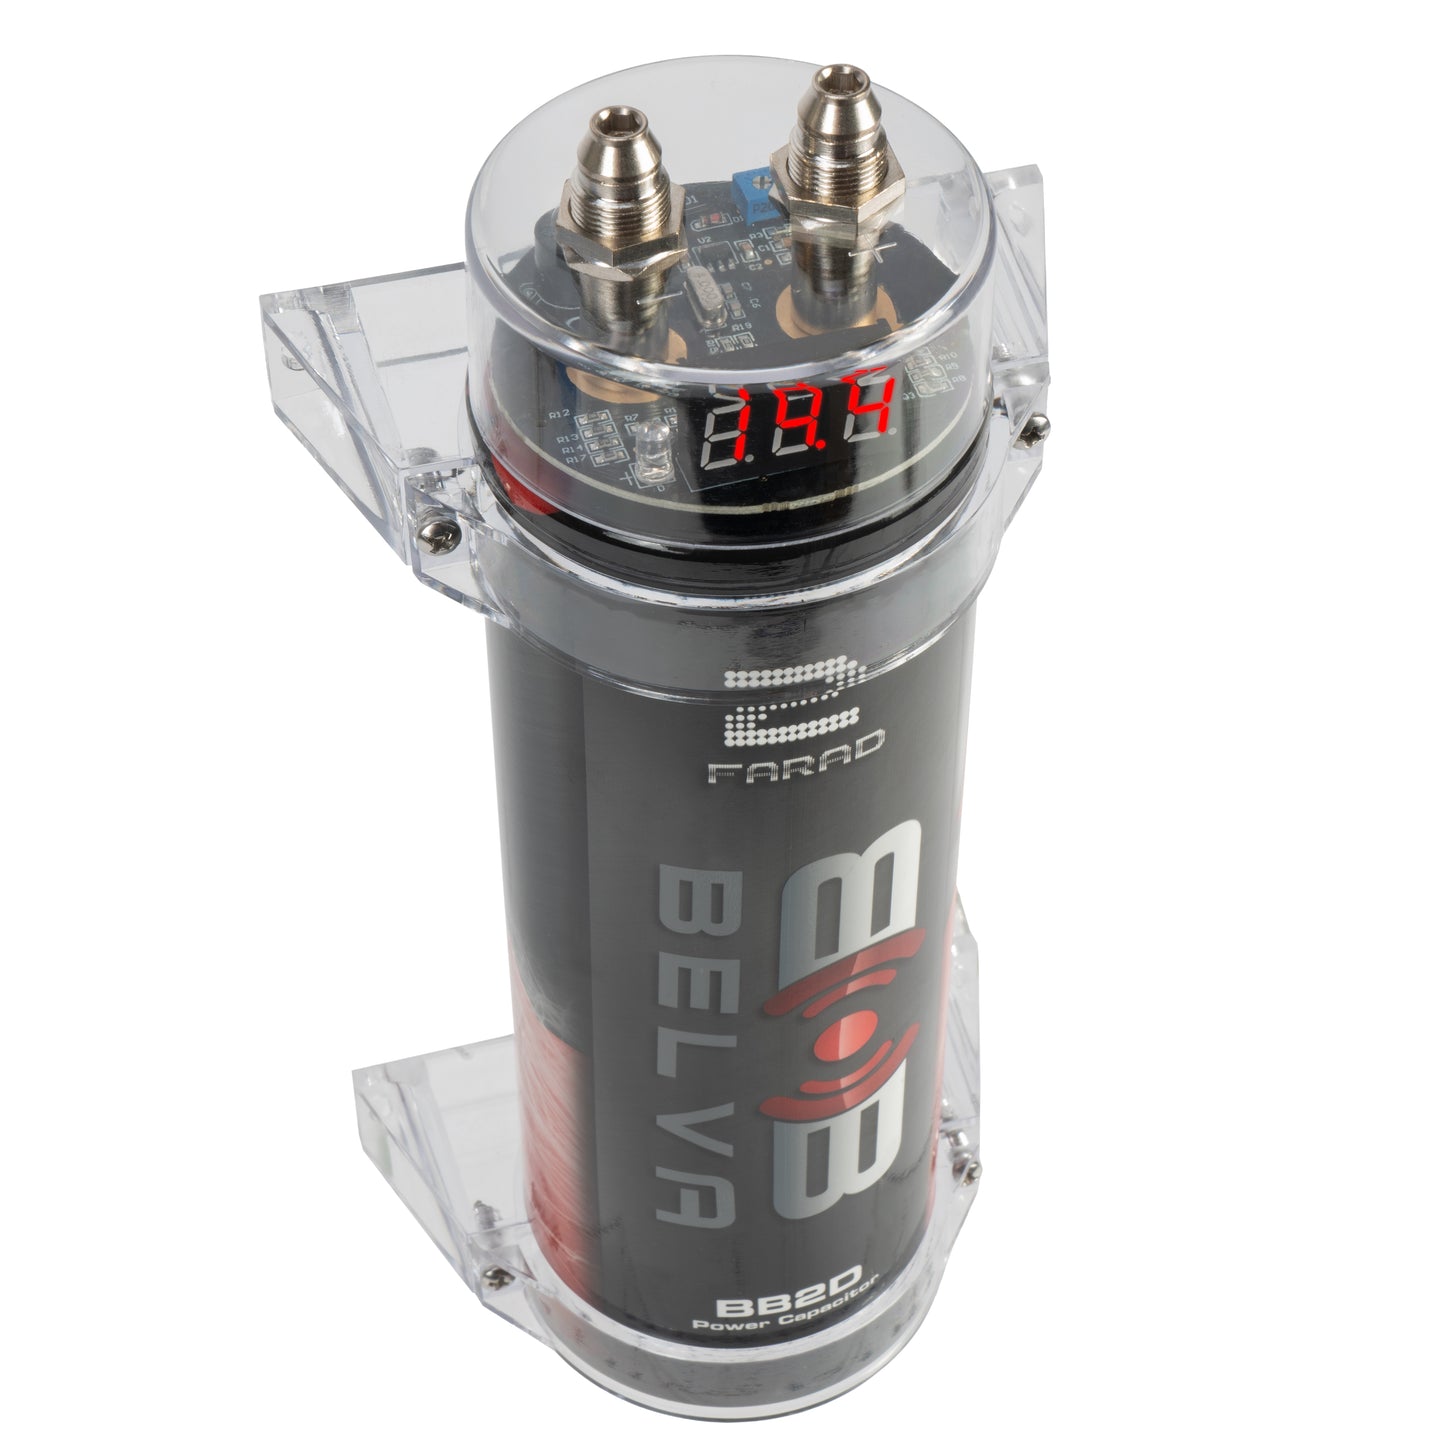 BB2D | 2.0 Farad Capacitor with Red Digital Voltage Display